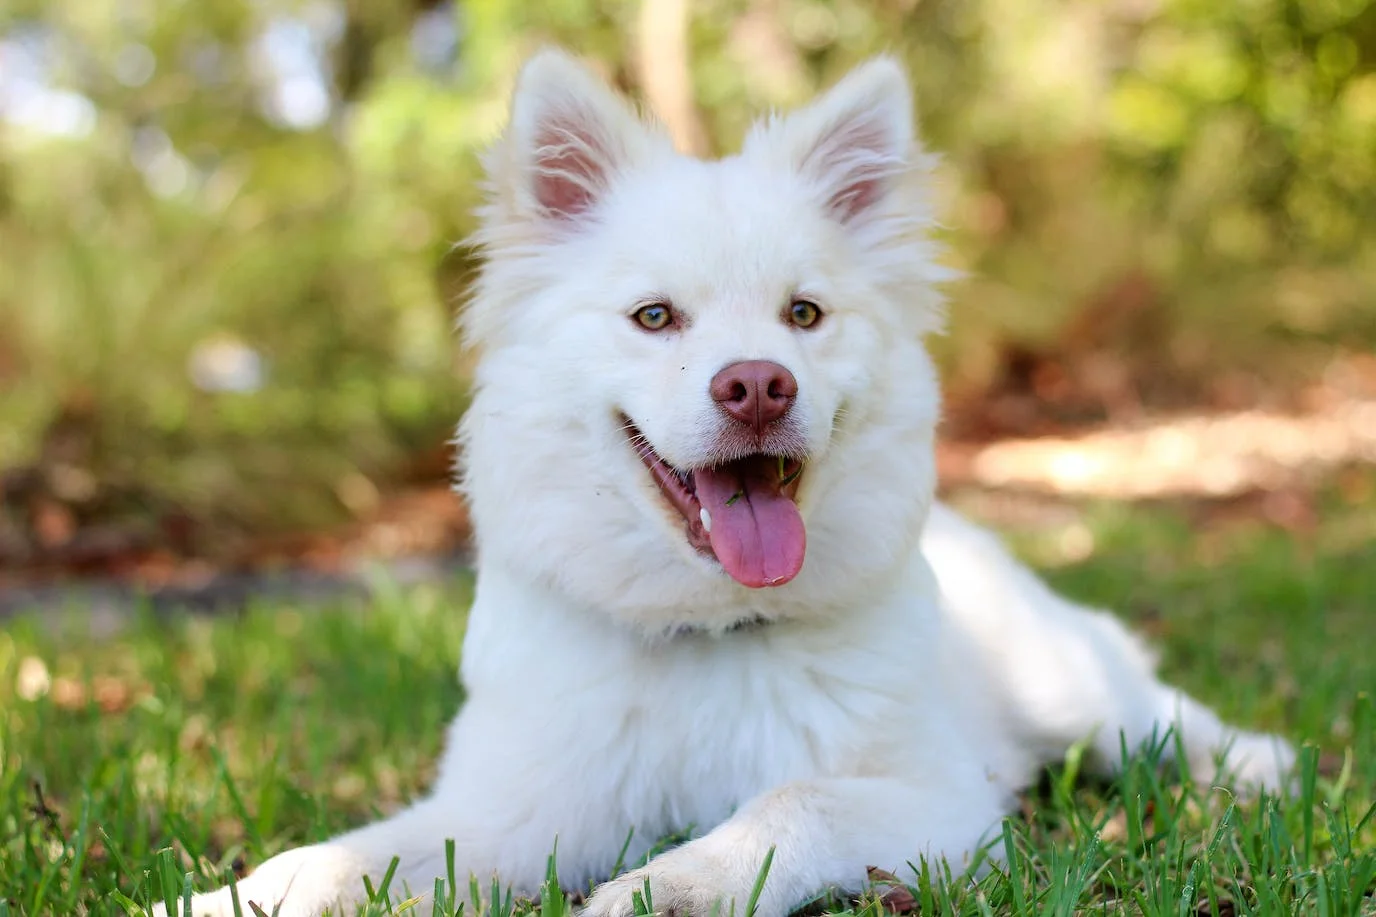 Dog photo : photography of an American Eskimo dog with green eyes lying in the grass with his tongue out. Blurred background.